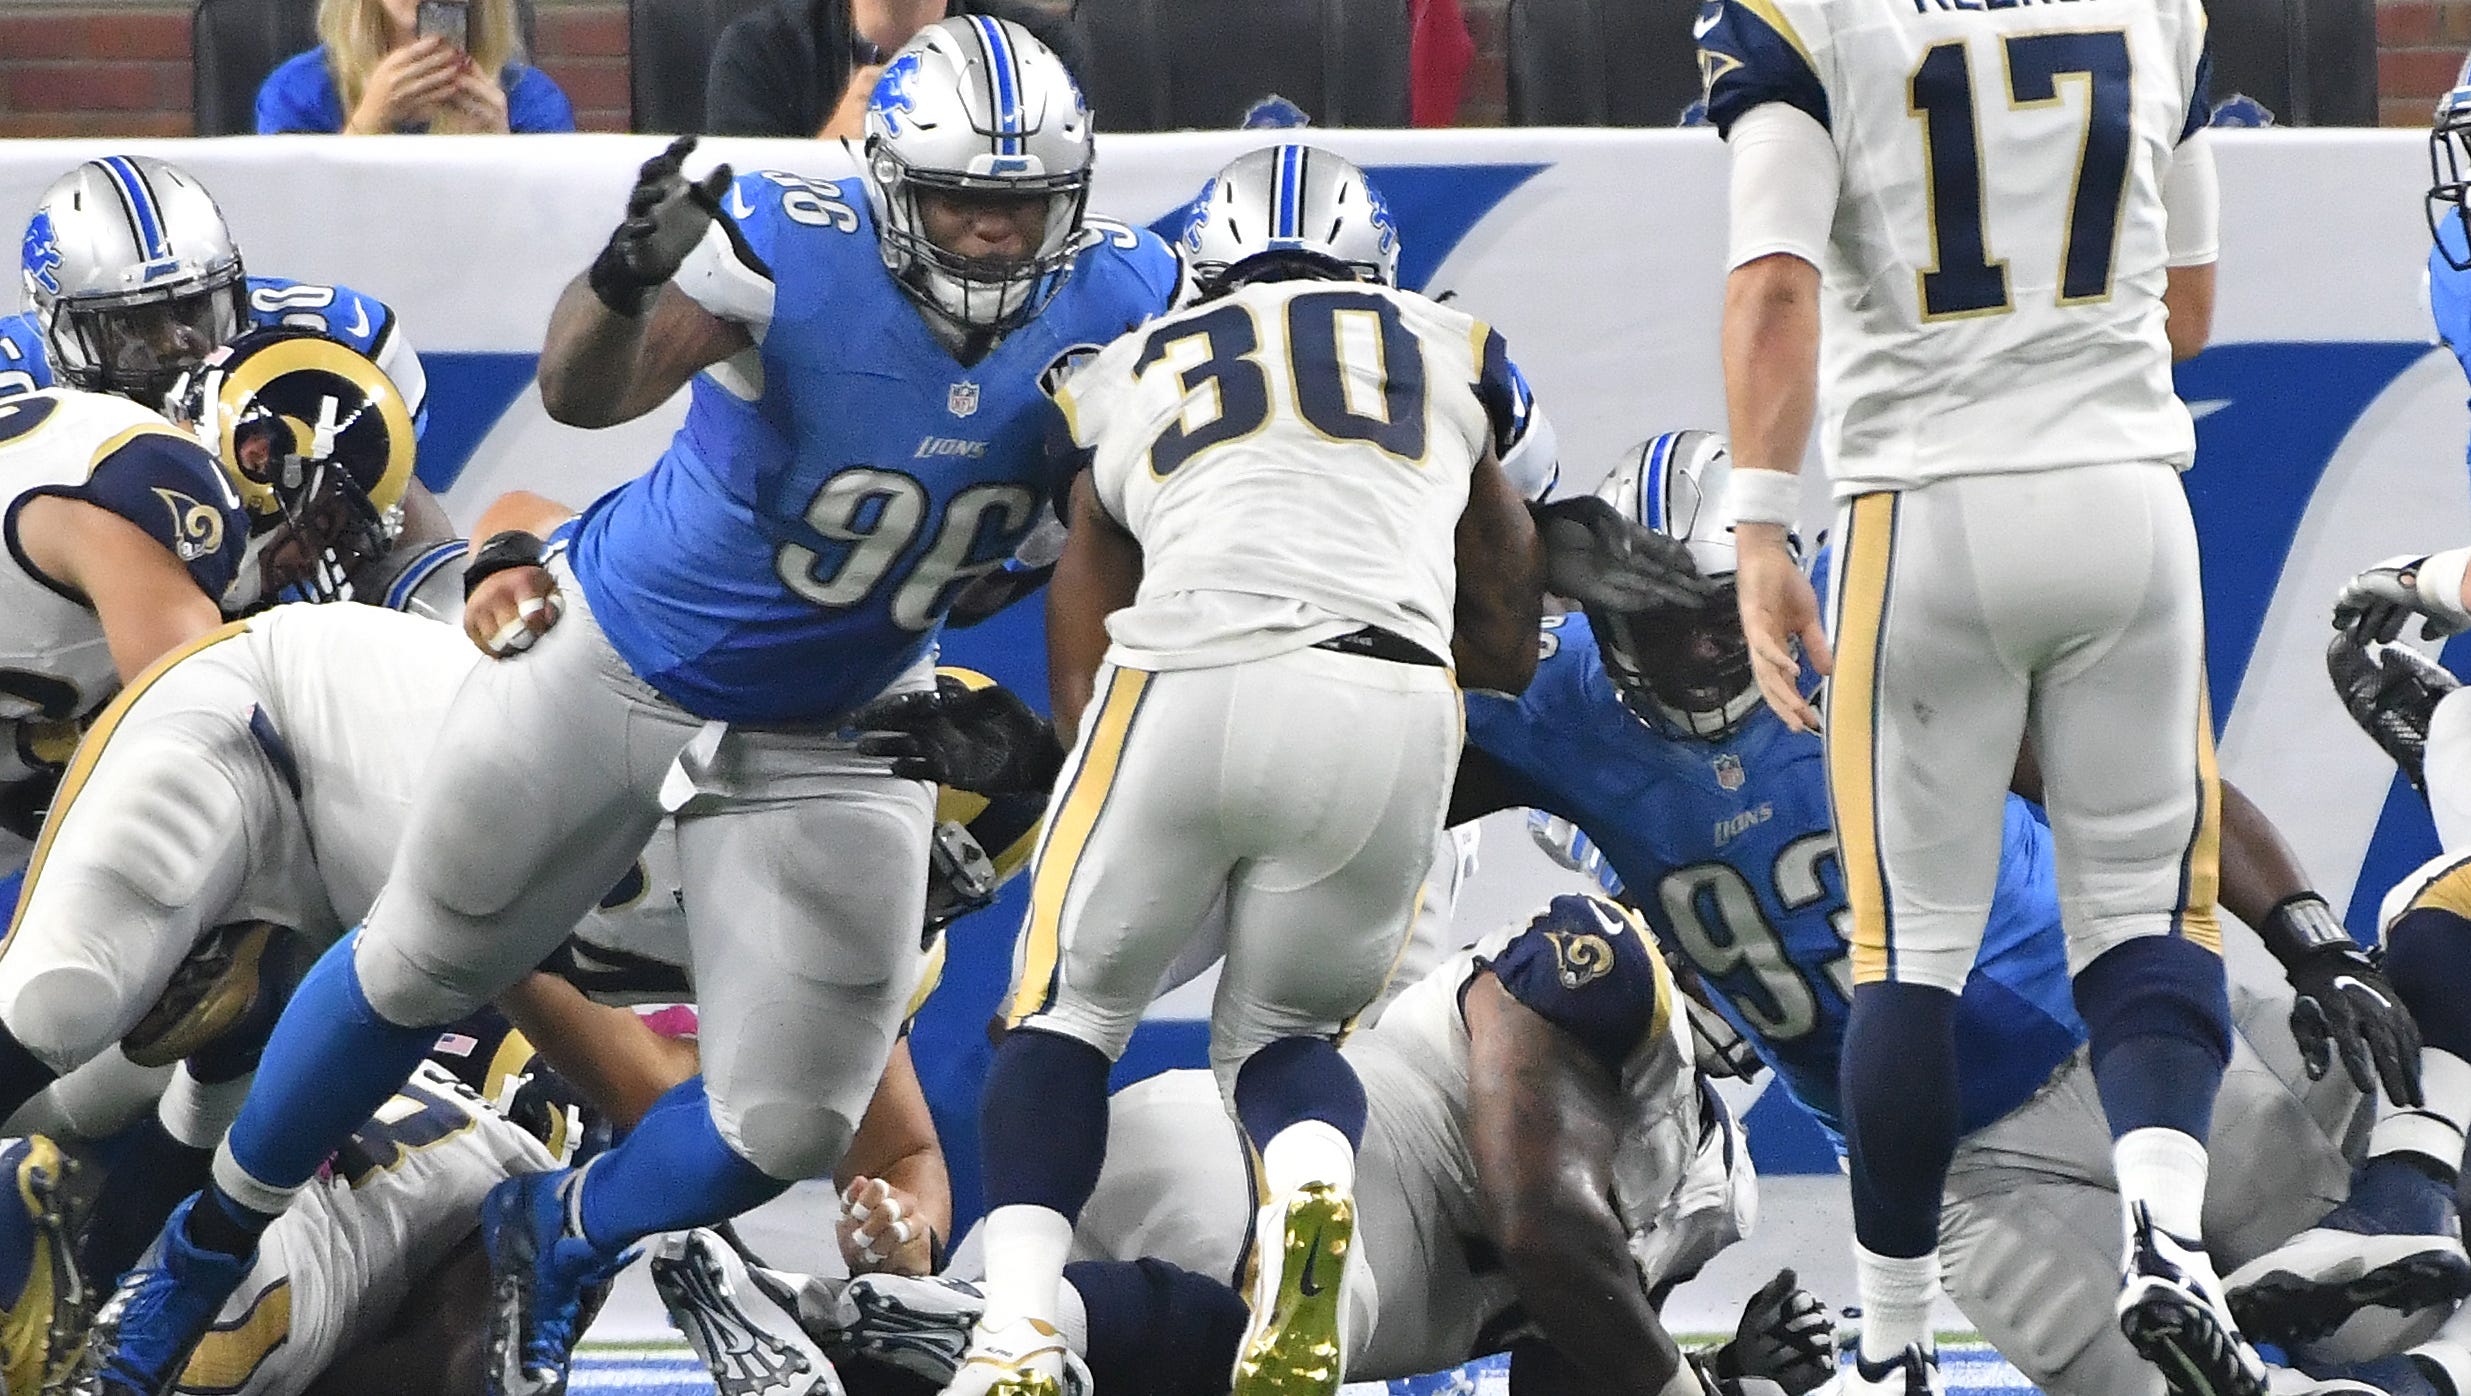 Lions Stefan Charles and Tyrunn Walker have Rams running back Todd Gurley in their sights, stopping the Rams on 4th and 1 to end the second quarter tied at 14.